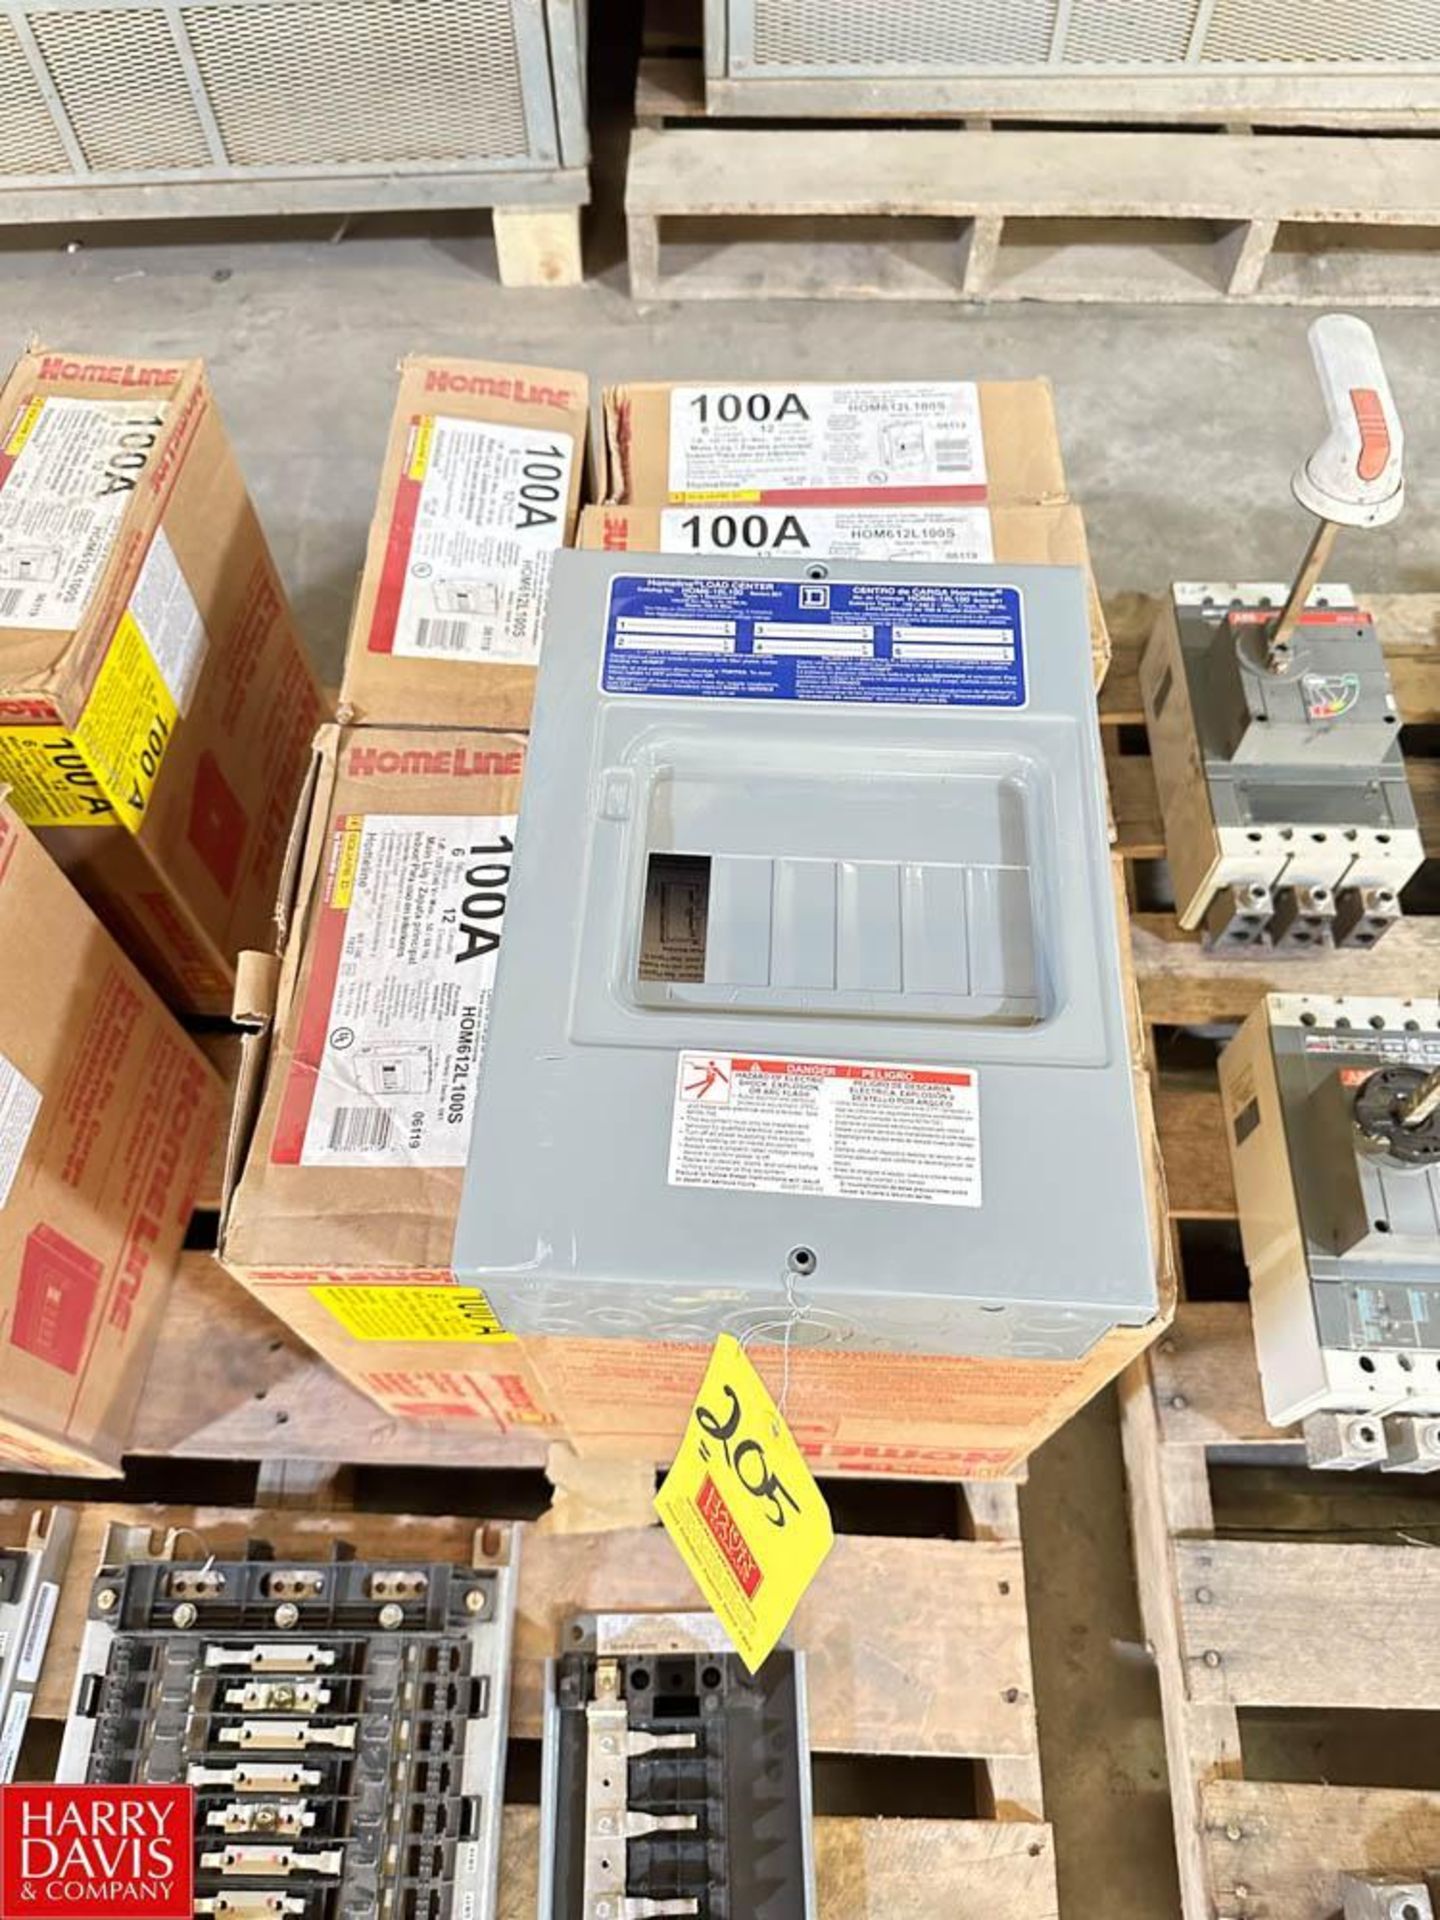 NEW Square D Homeline 100 AMP, (6) Space, (12) Circuit Breaker Boxes